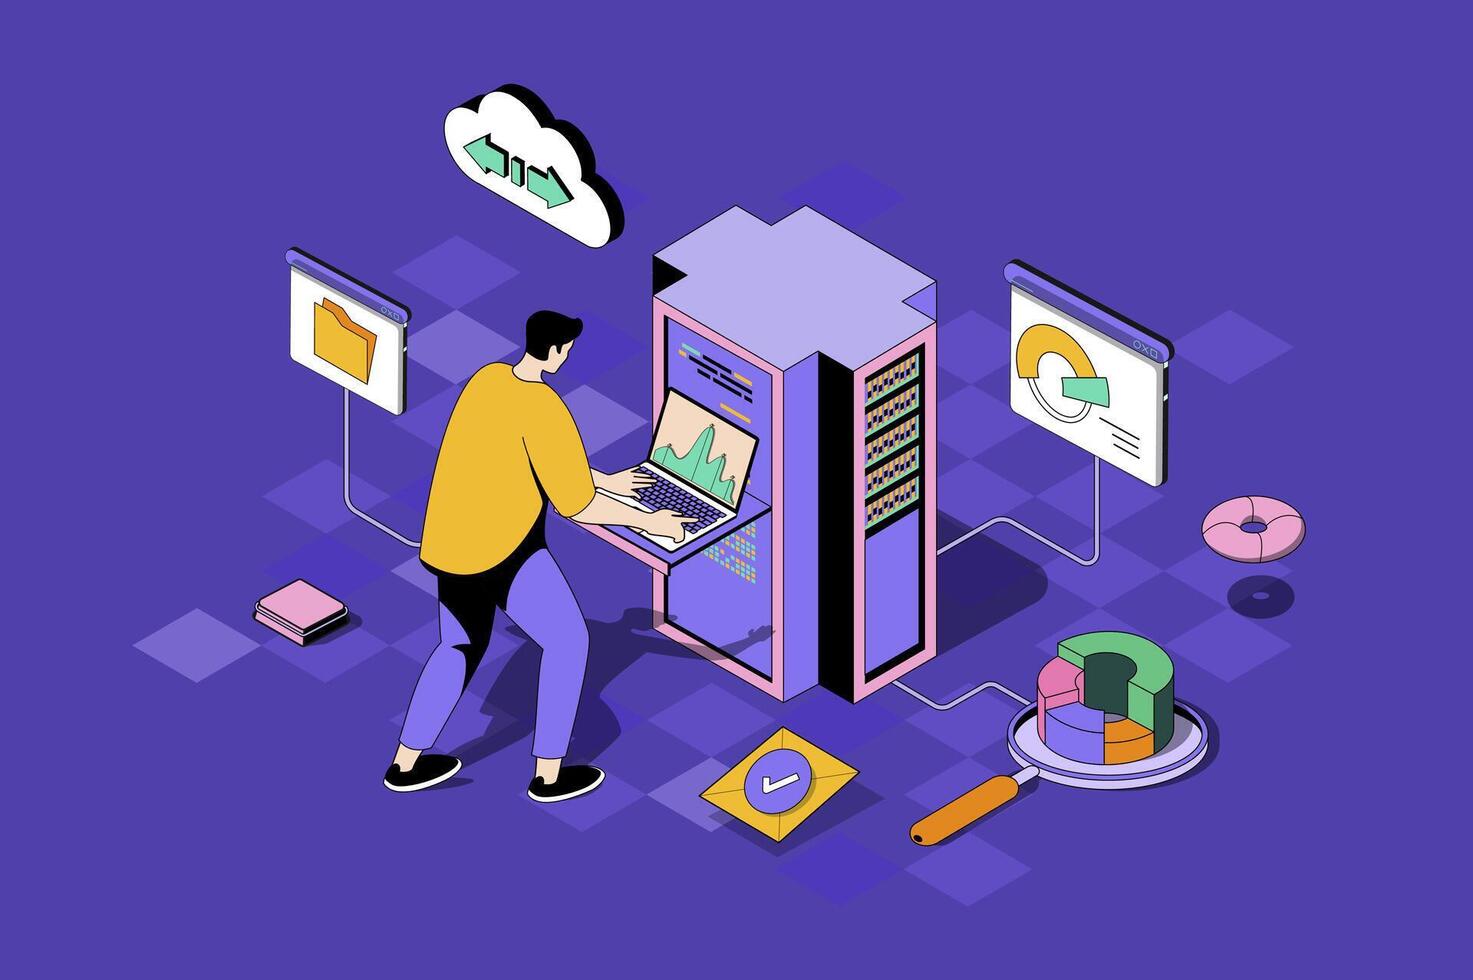 Data center web concept in 3d isometric design. Man working as administrator in server room with racks for big data storage and cloud computing. web illustration with people isometry scene vector